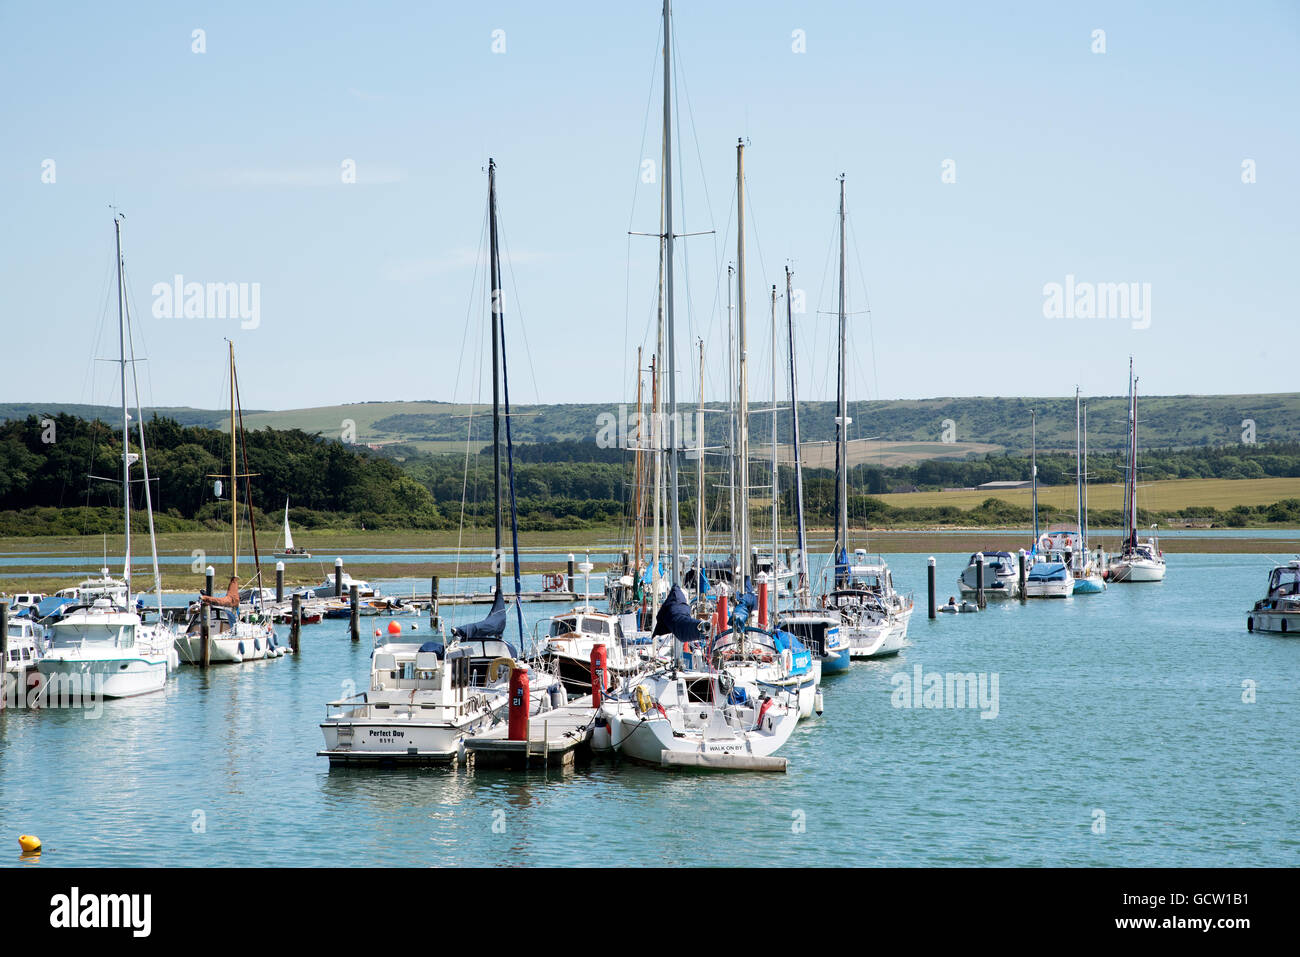 THE RIVER YAR AT YARMOUTH ISLE OF WIGHT UK  Boats on the Western Yar a scenic location on the Isle of Wight. Stock Photo